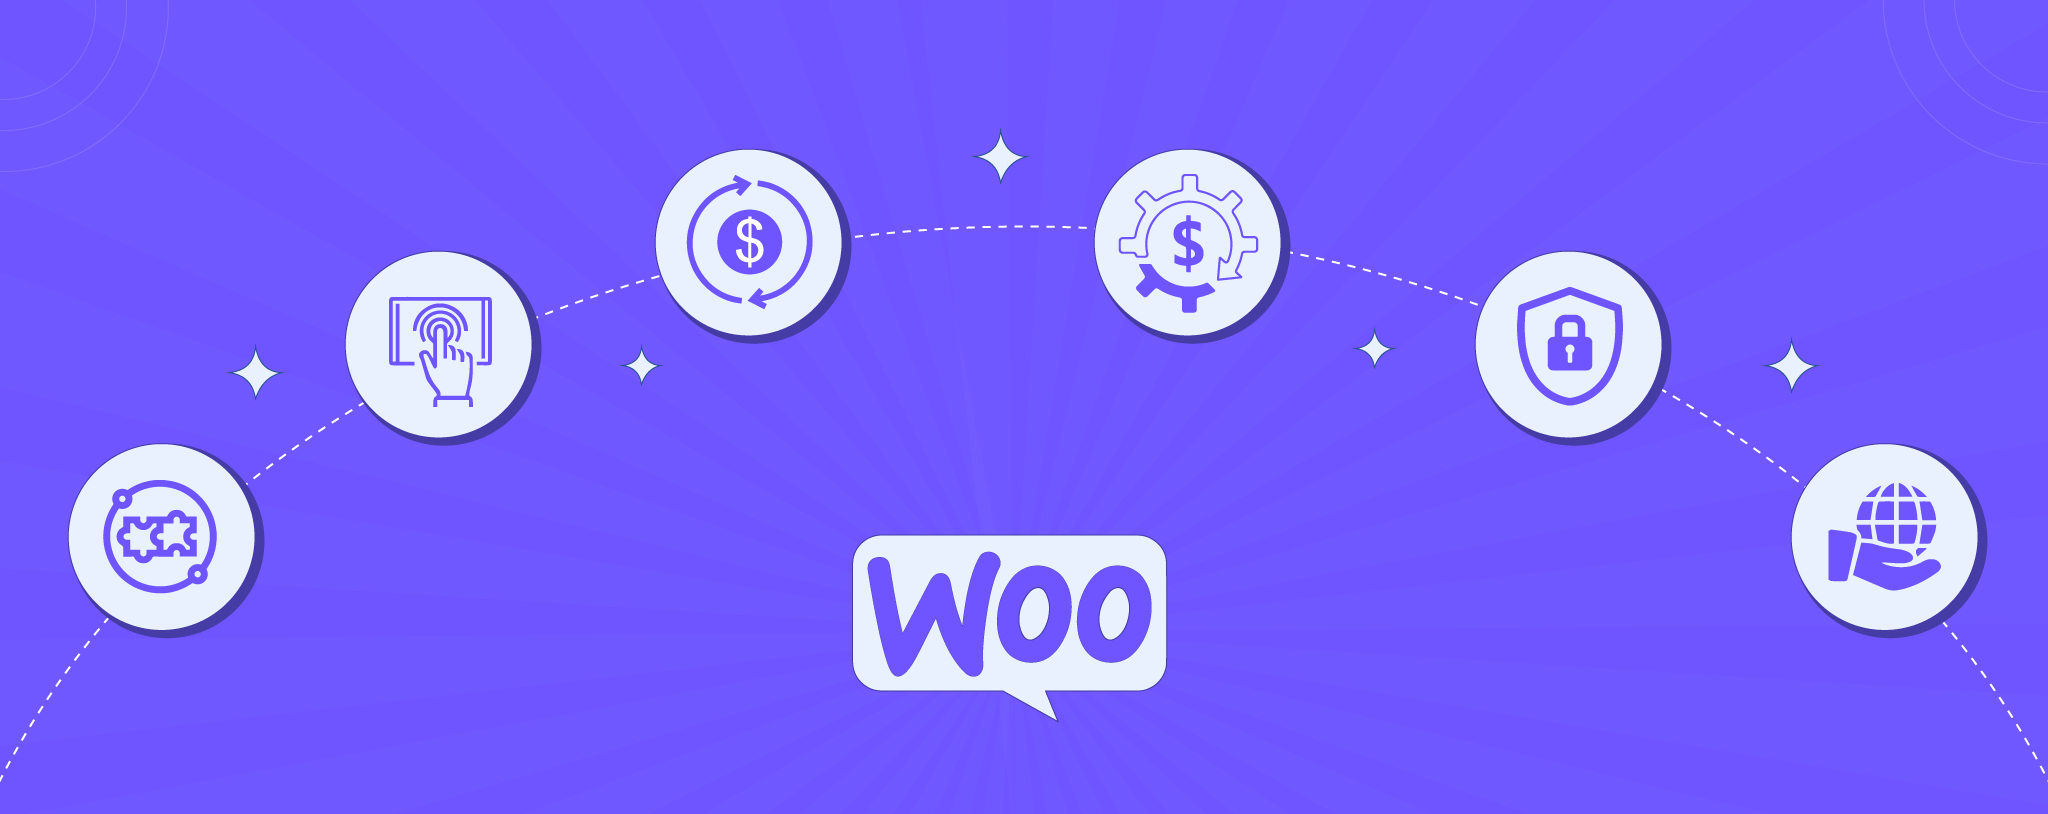 Aspects to consider while choosing a payment gateway that works for WooCommerce?